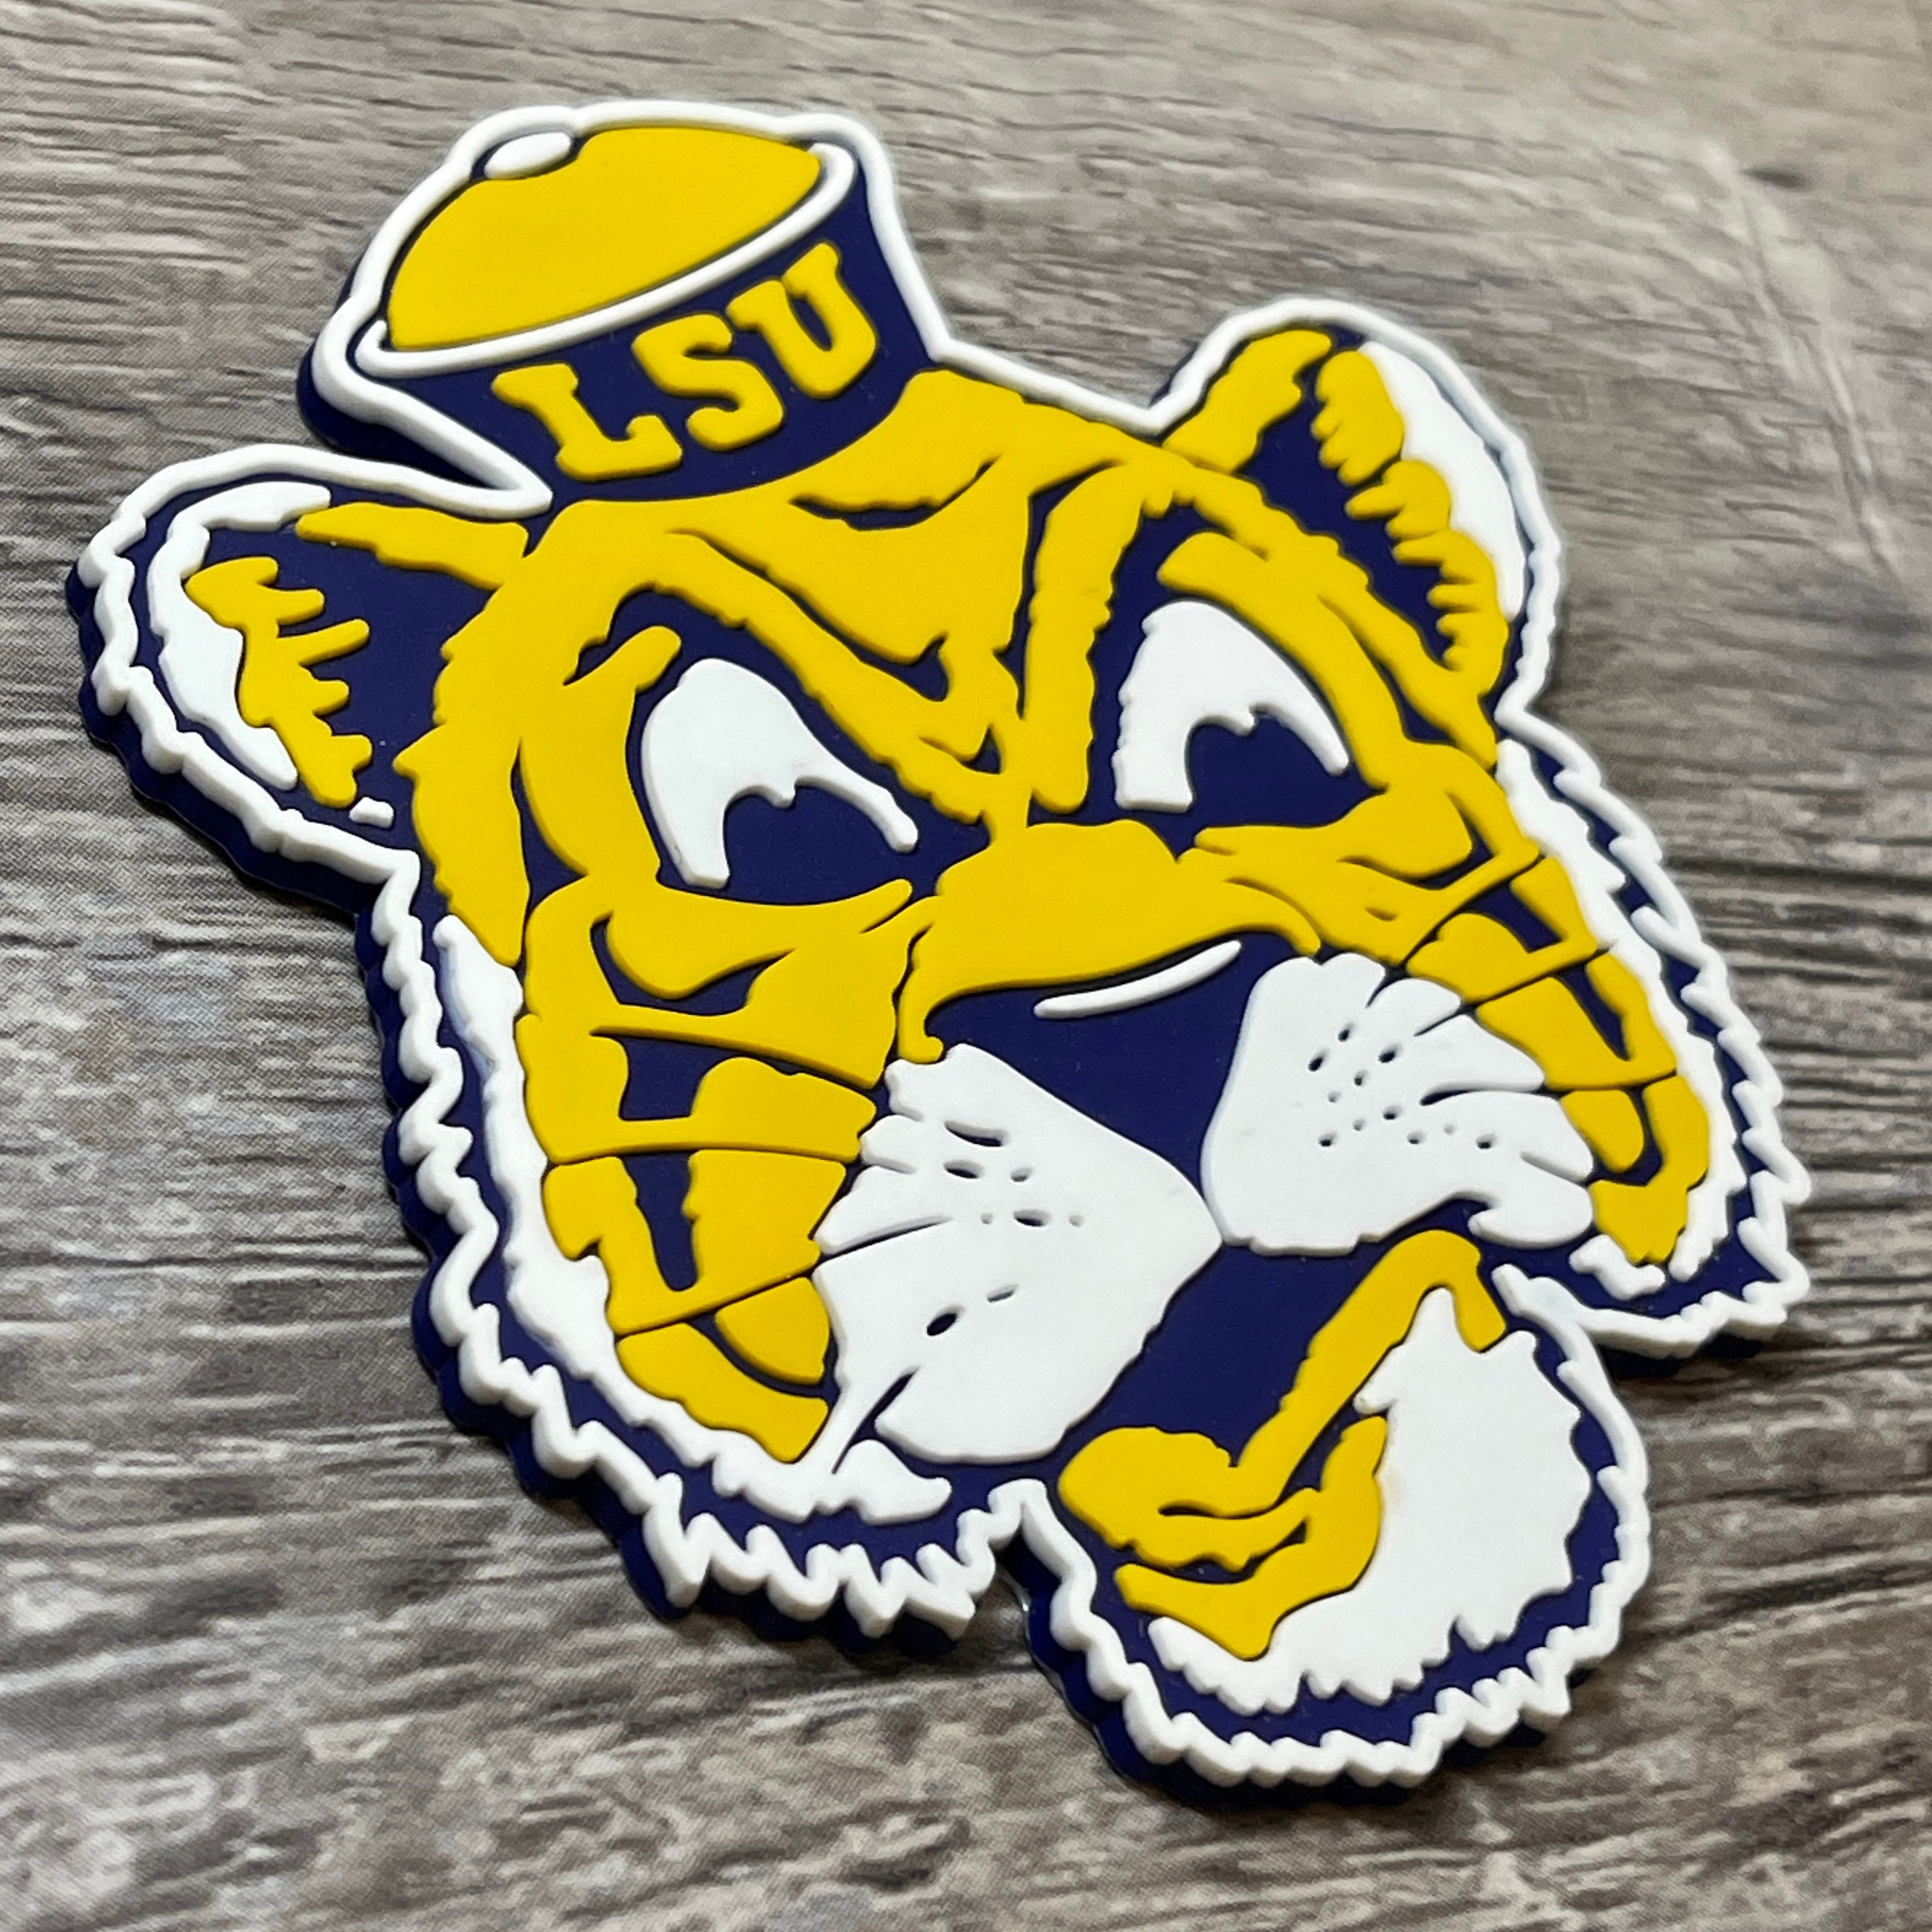 LSU Sailor Mike 3D Classic Rope Hat- Navy